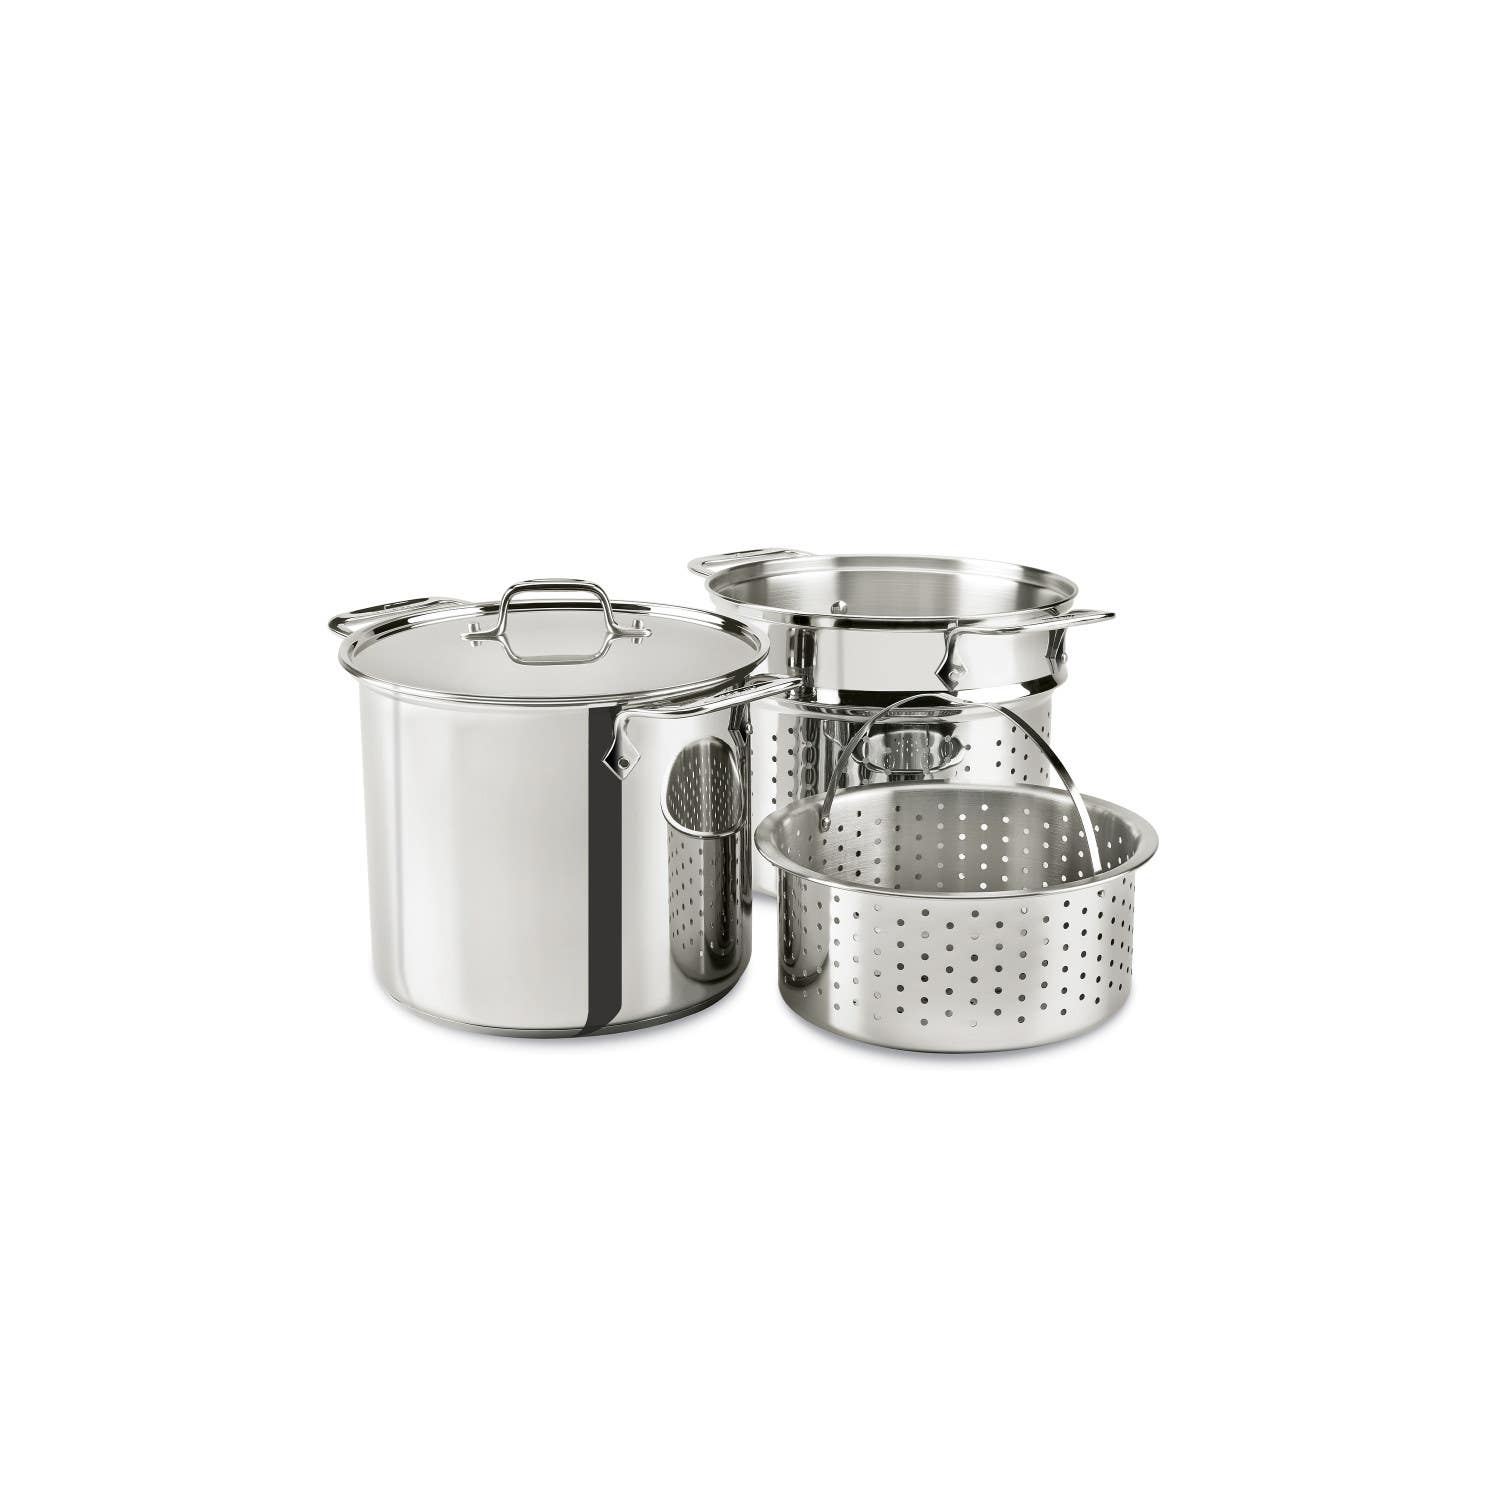 Al-clad Stainless Steel 12-Quart Multi Cooker Cookware Set 3-Piece with Lid